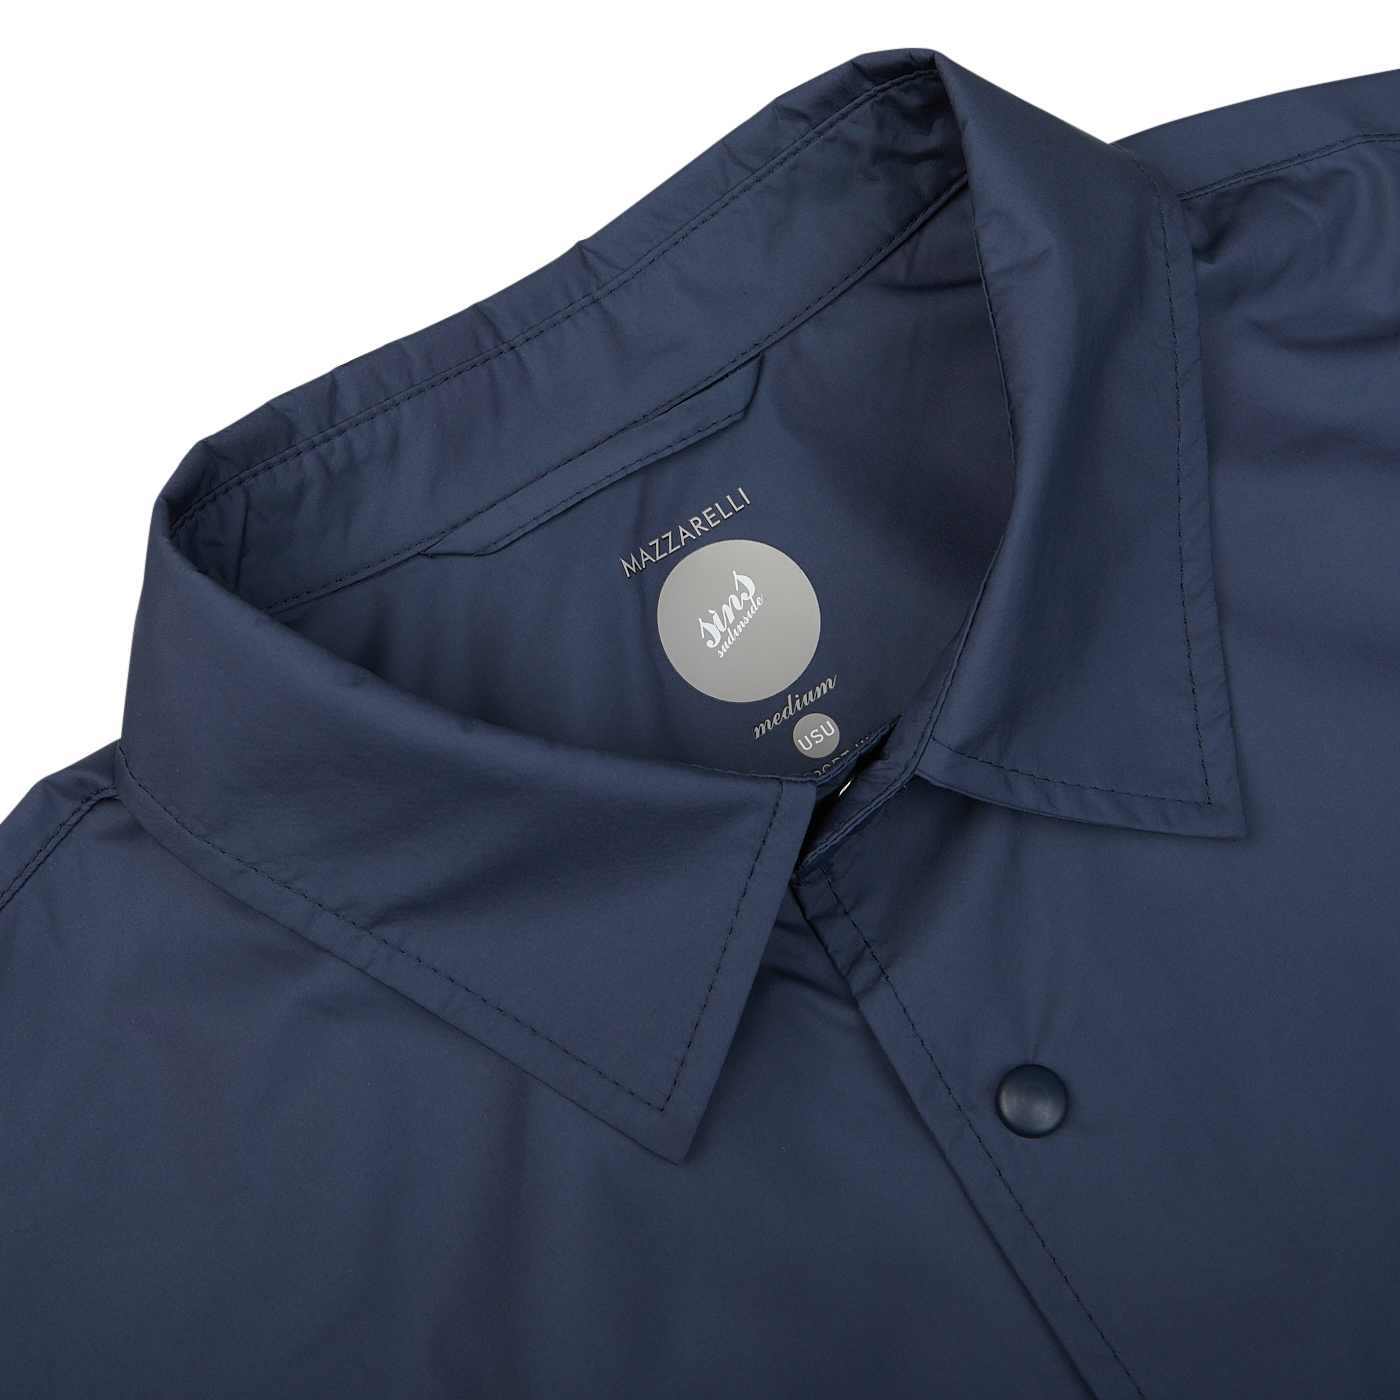 Navy blue nylon water resistant overshirt by Mazzarelli with brand label visible on the inside.